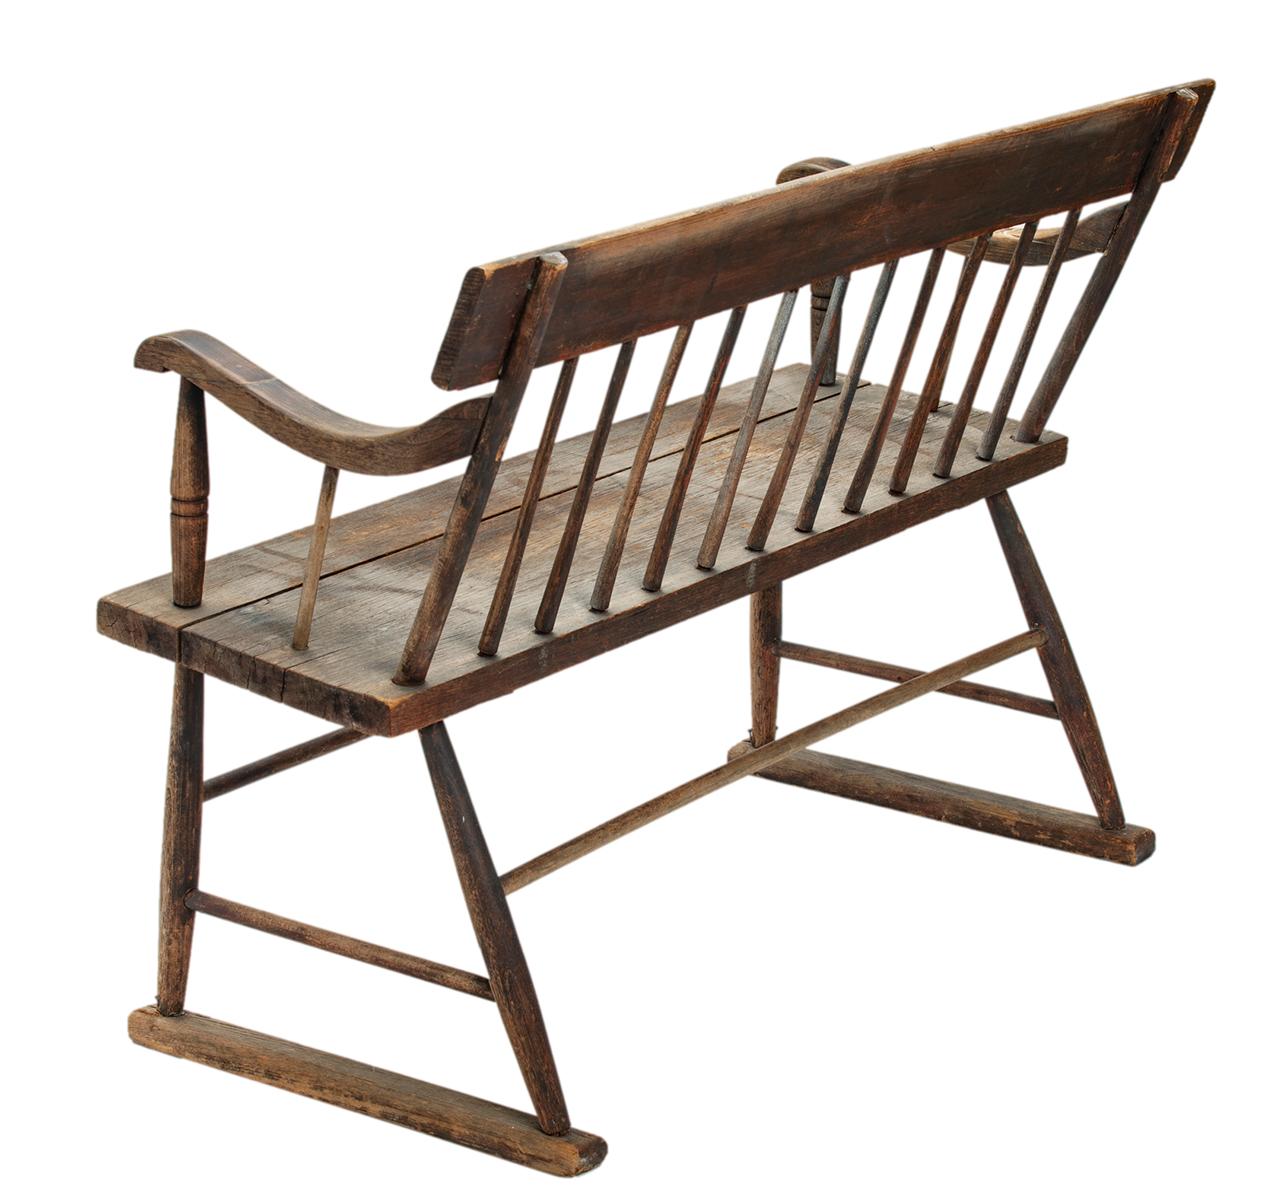 Hand-Crafted Antique American Primitive Armed Bench